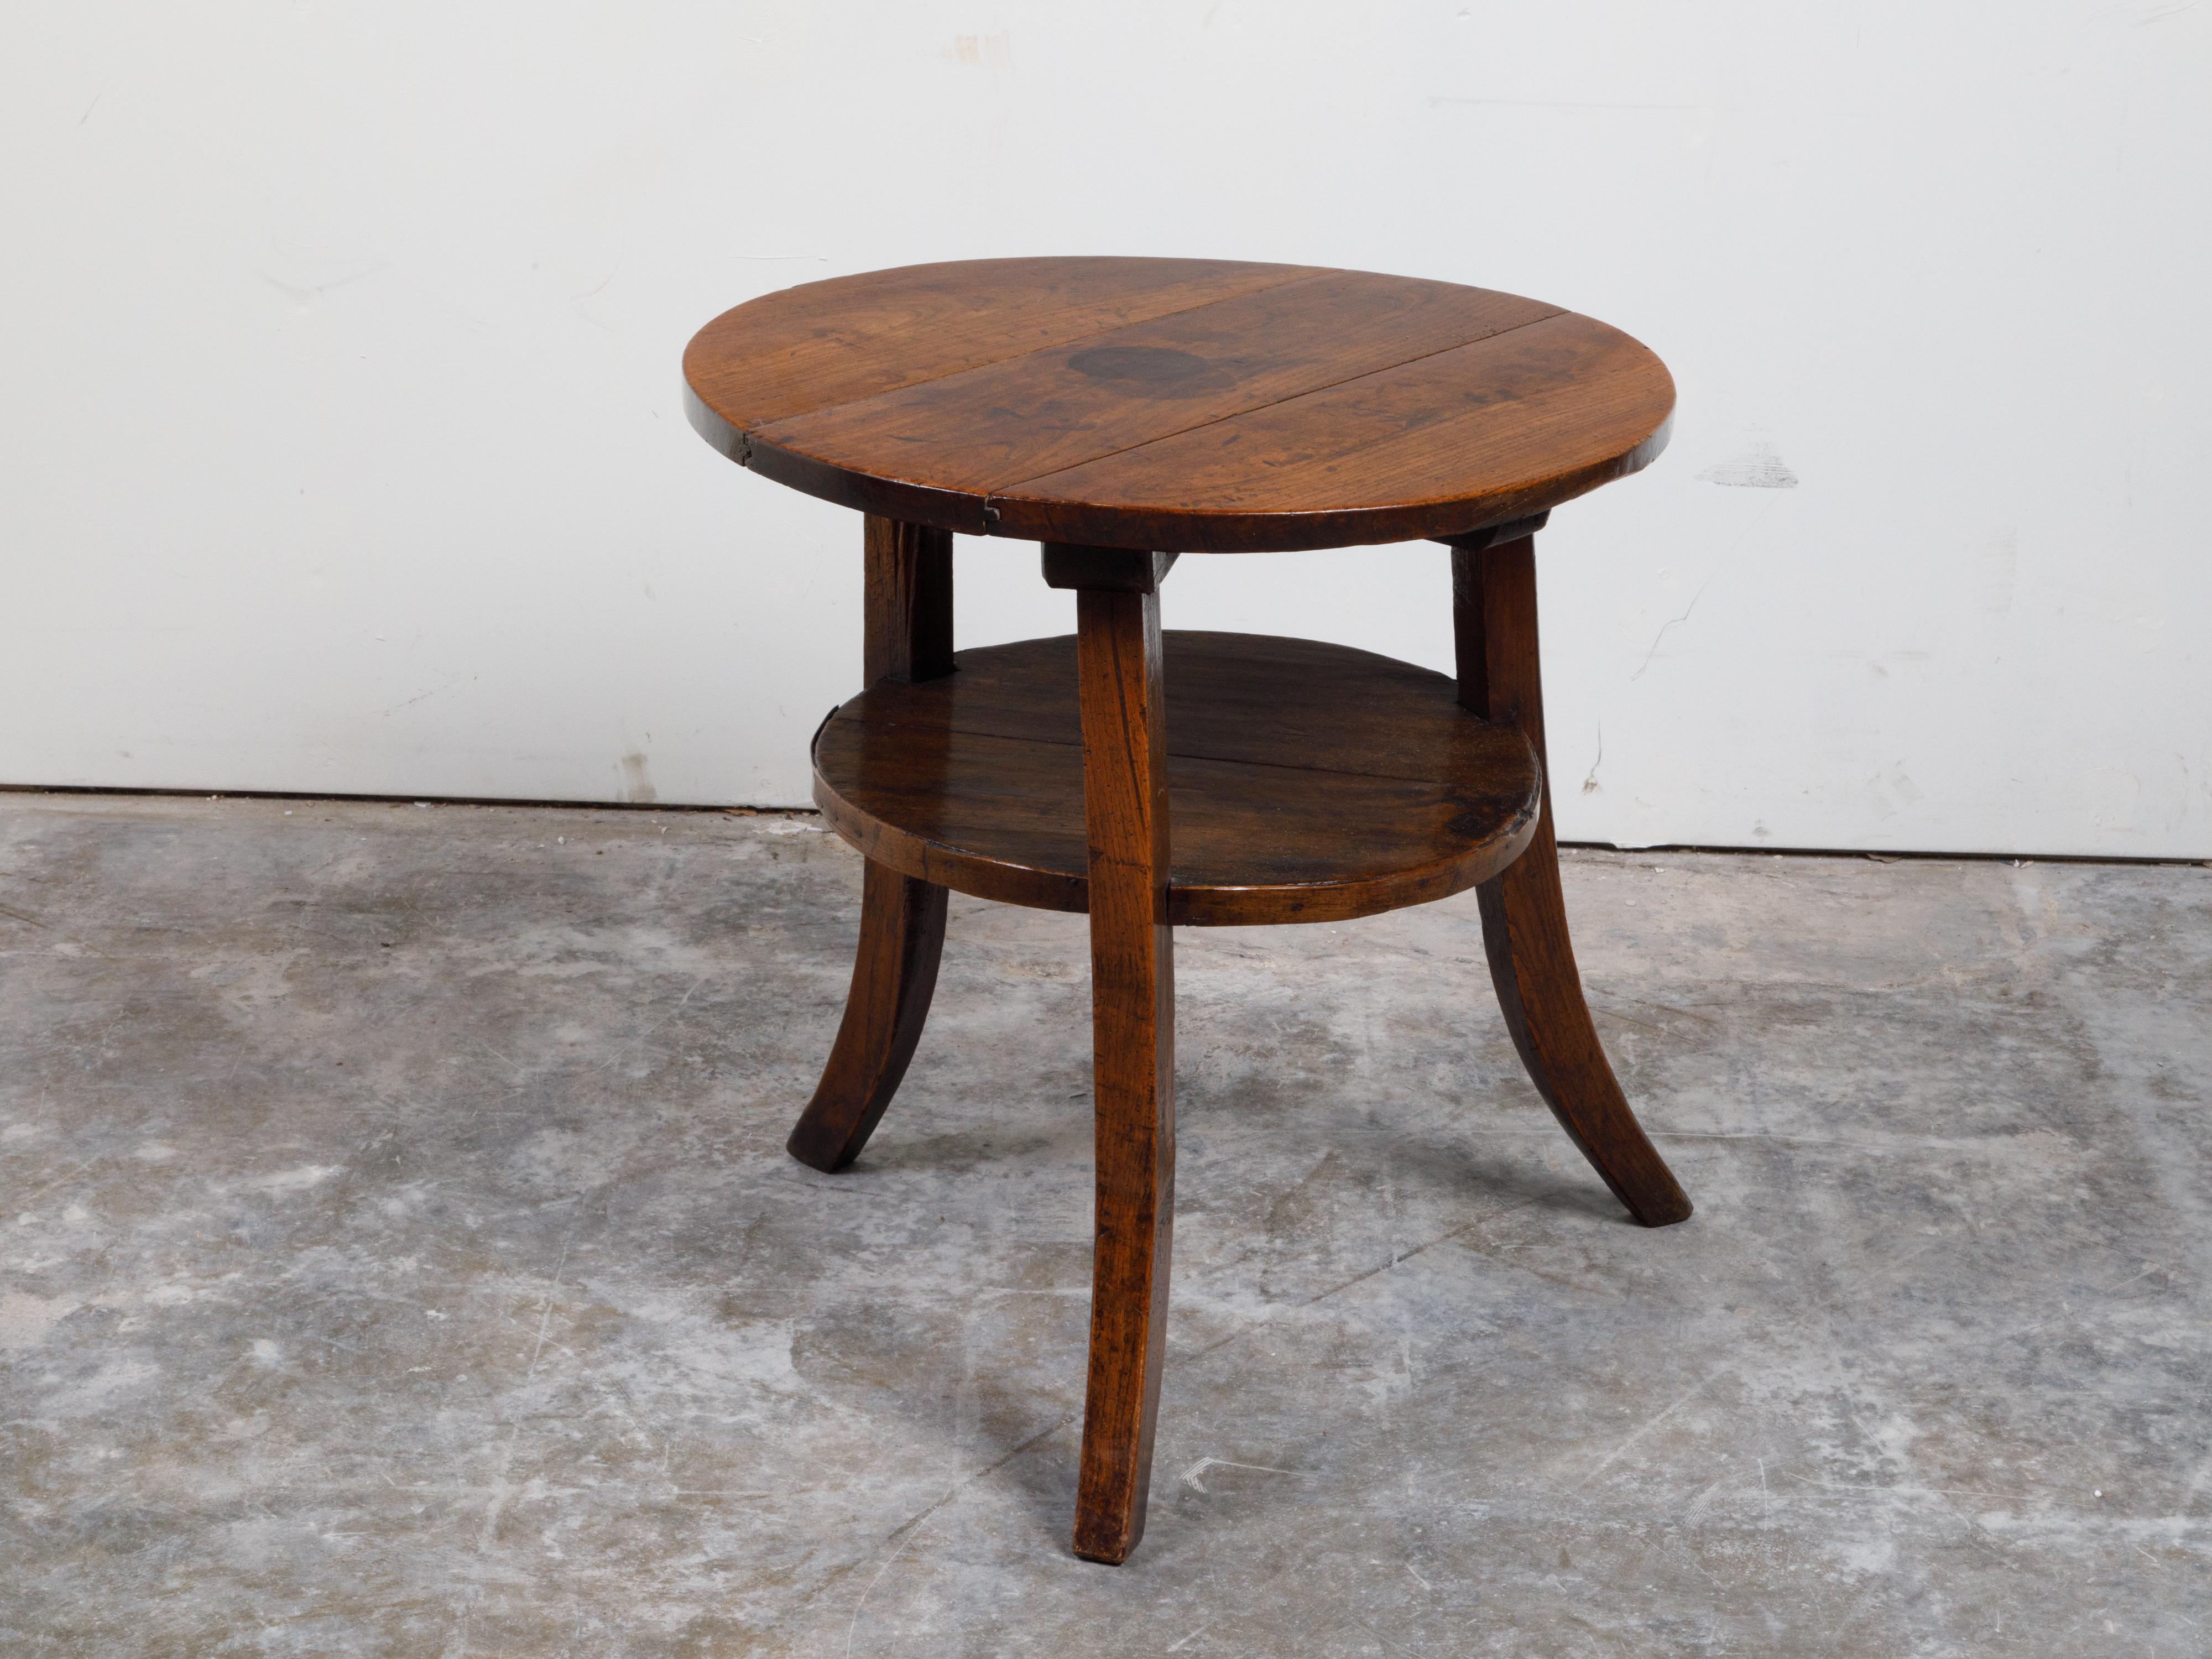 An English walnut side table from the 19th century, with three saber legs, round top and dark patina. Created in England during the 19th century, this walnut table features a circular planked top resting above three saber legs securing a lower shelf